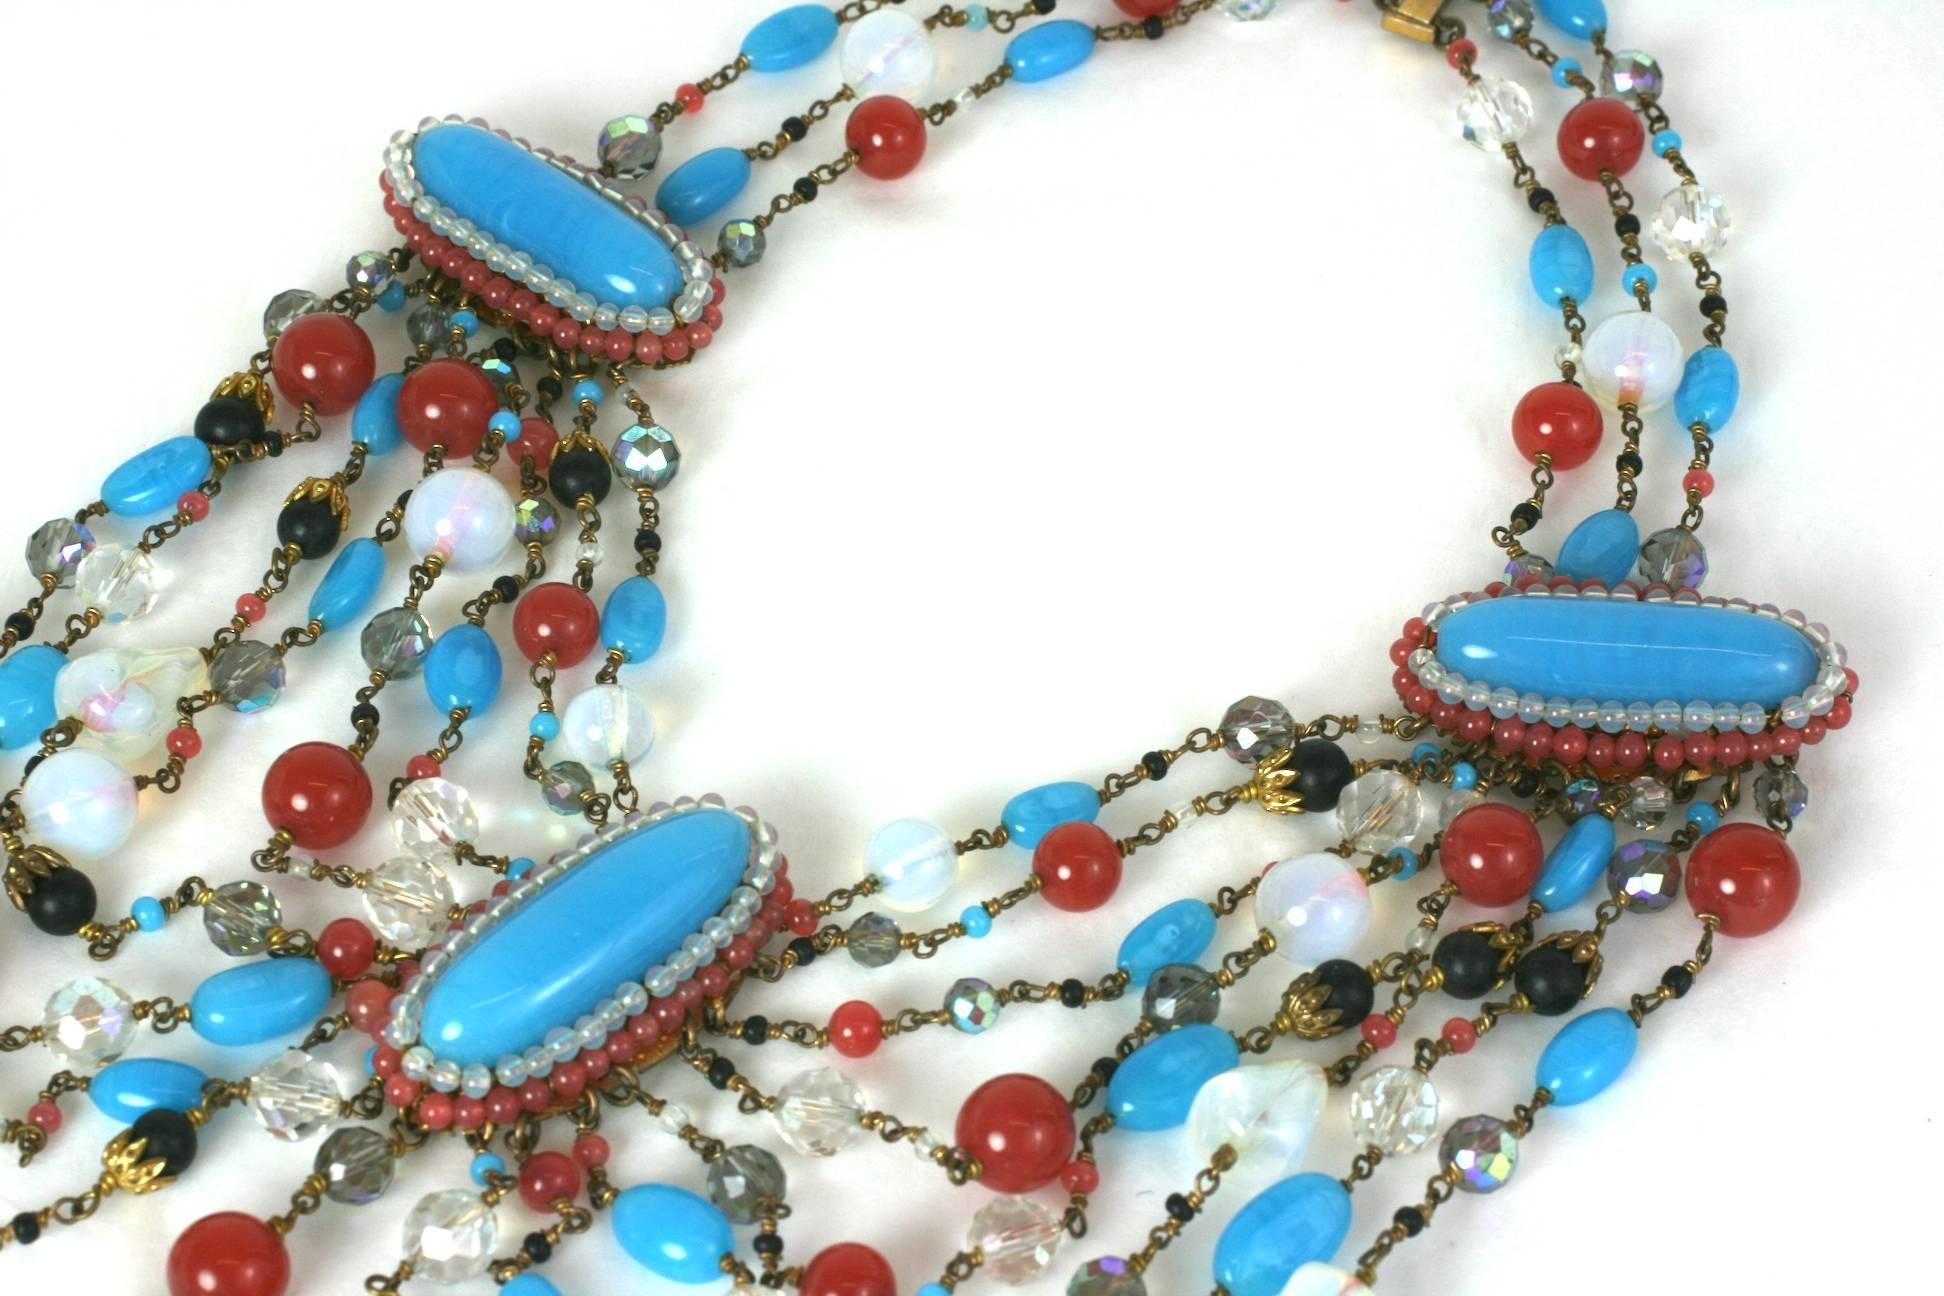 Extraordinary Louis Rousselet  draped bib necklace of dramatic pate de verre swags and hand sewn oval plaques in turquoise, opaline, carnelian, jet and aurora crystal hand made beads set in gilt metal. Handmade with slide clasp. France 1930's.